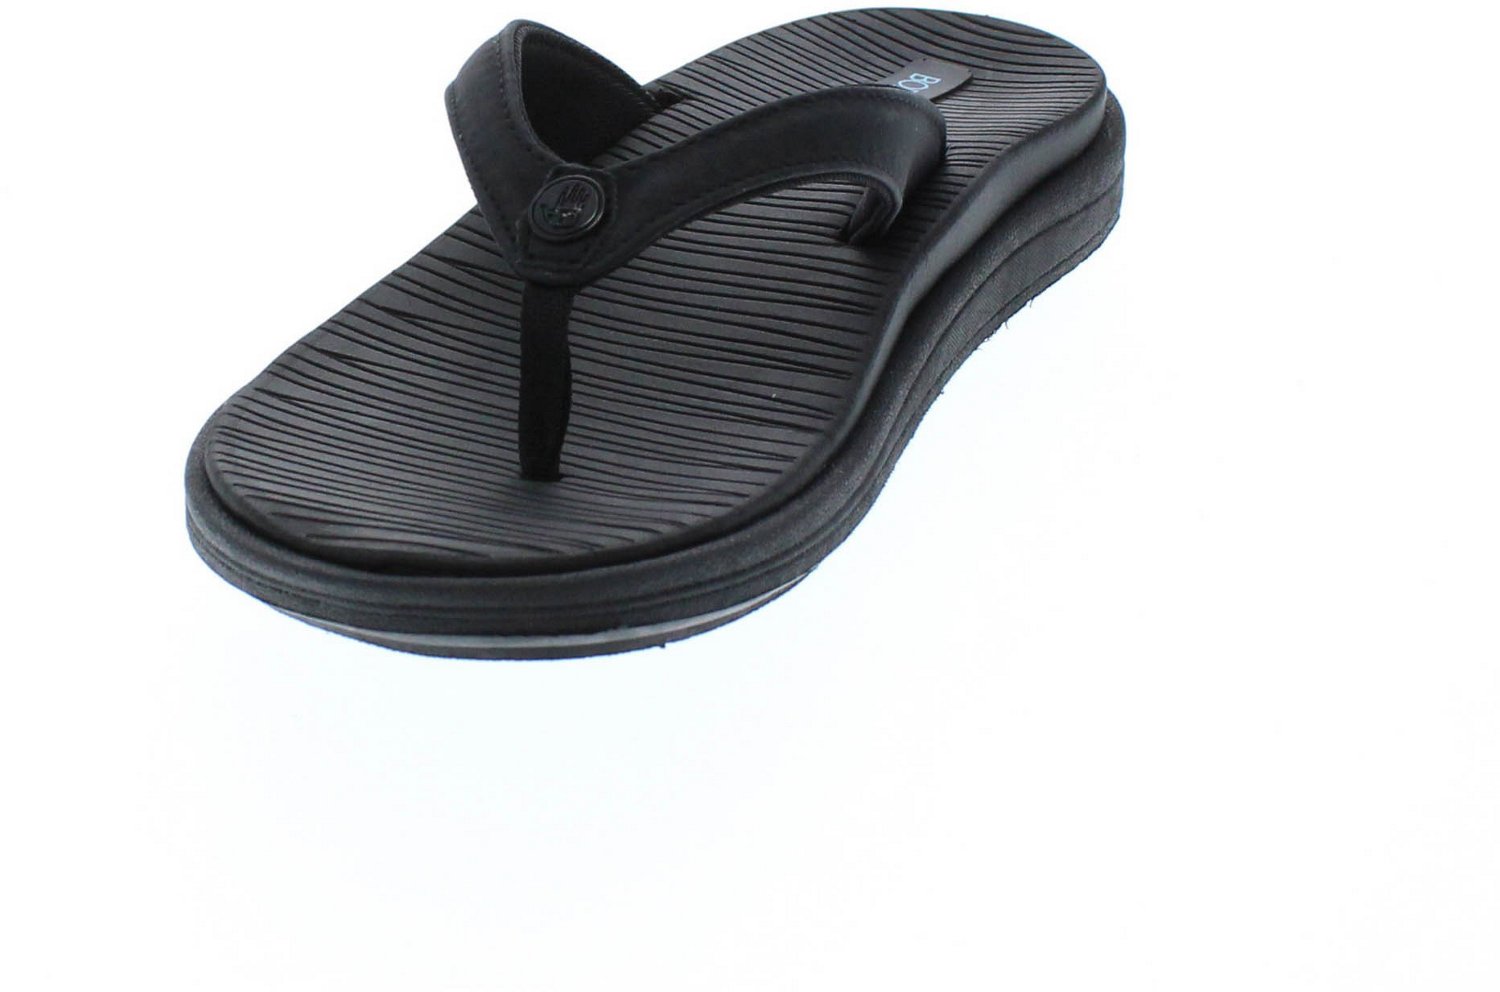 Body Glove Women's Lotus Sandals | Free Shipping at Academy